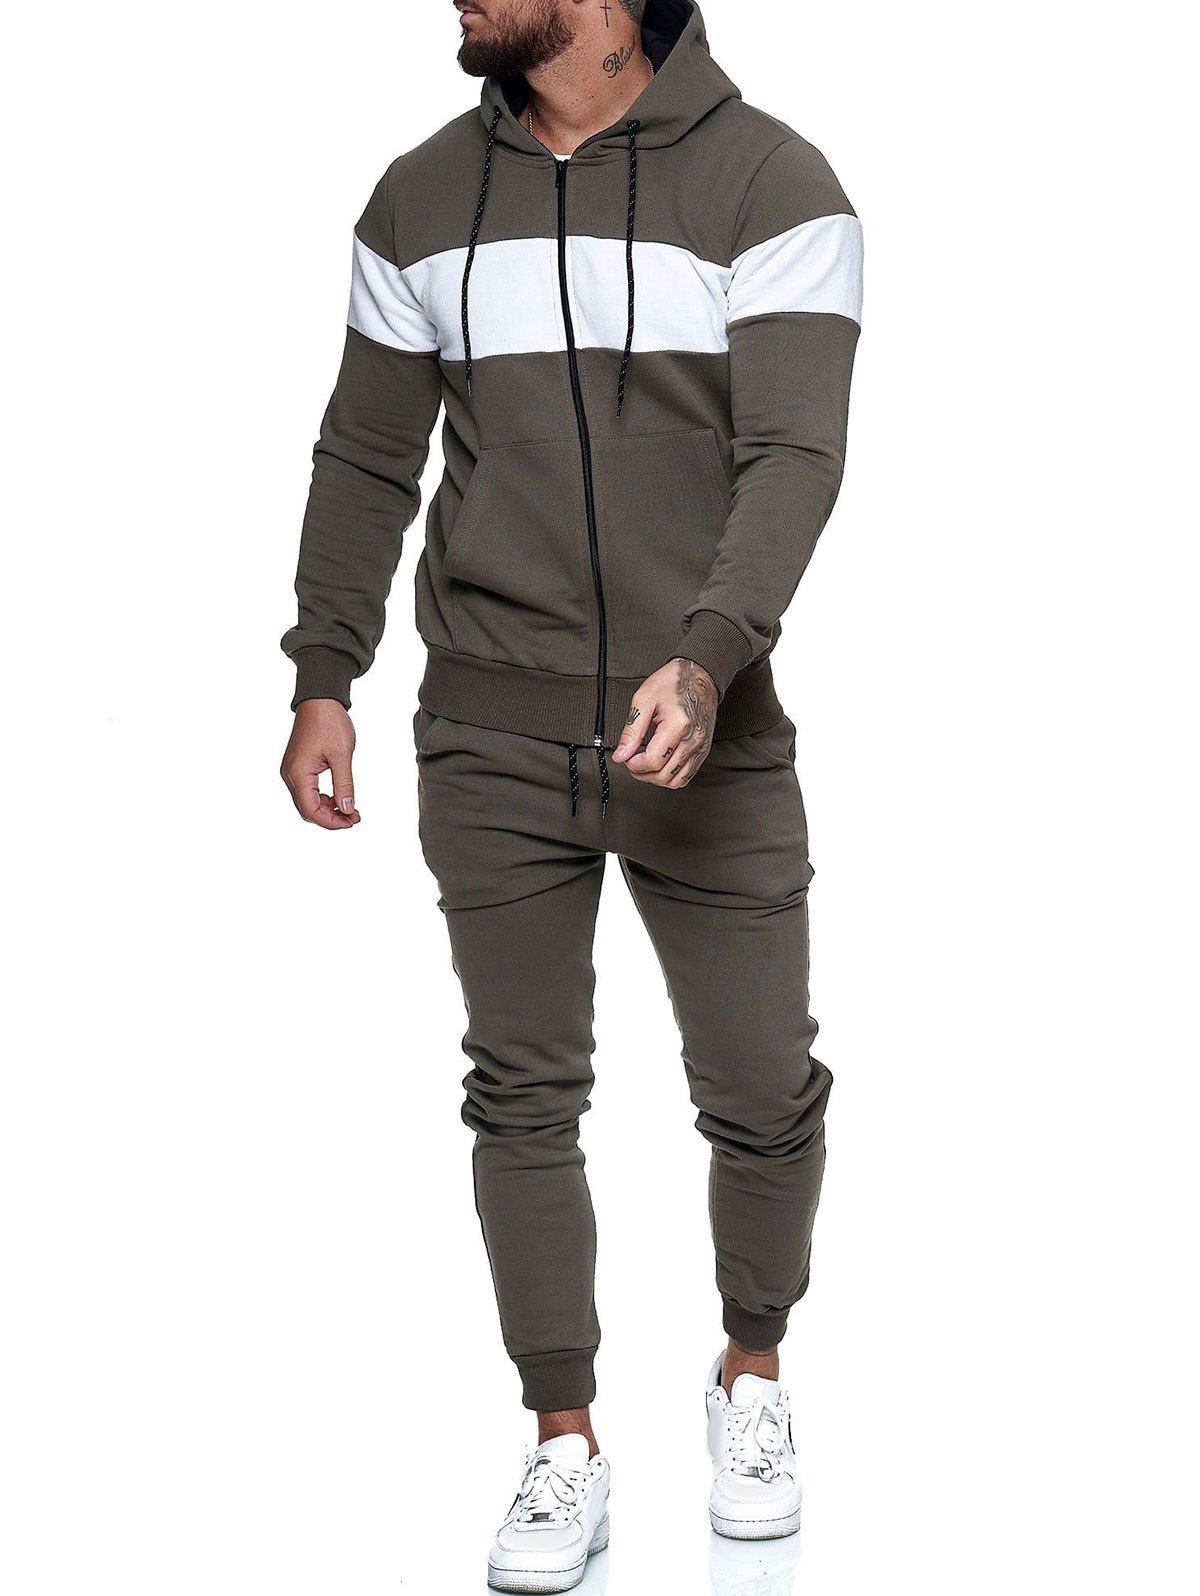 Contrast Zip Up Hoodie Jacket and Pants Sports Two Piece Set - ARMY GREEN XS